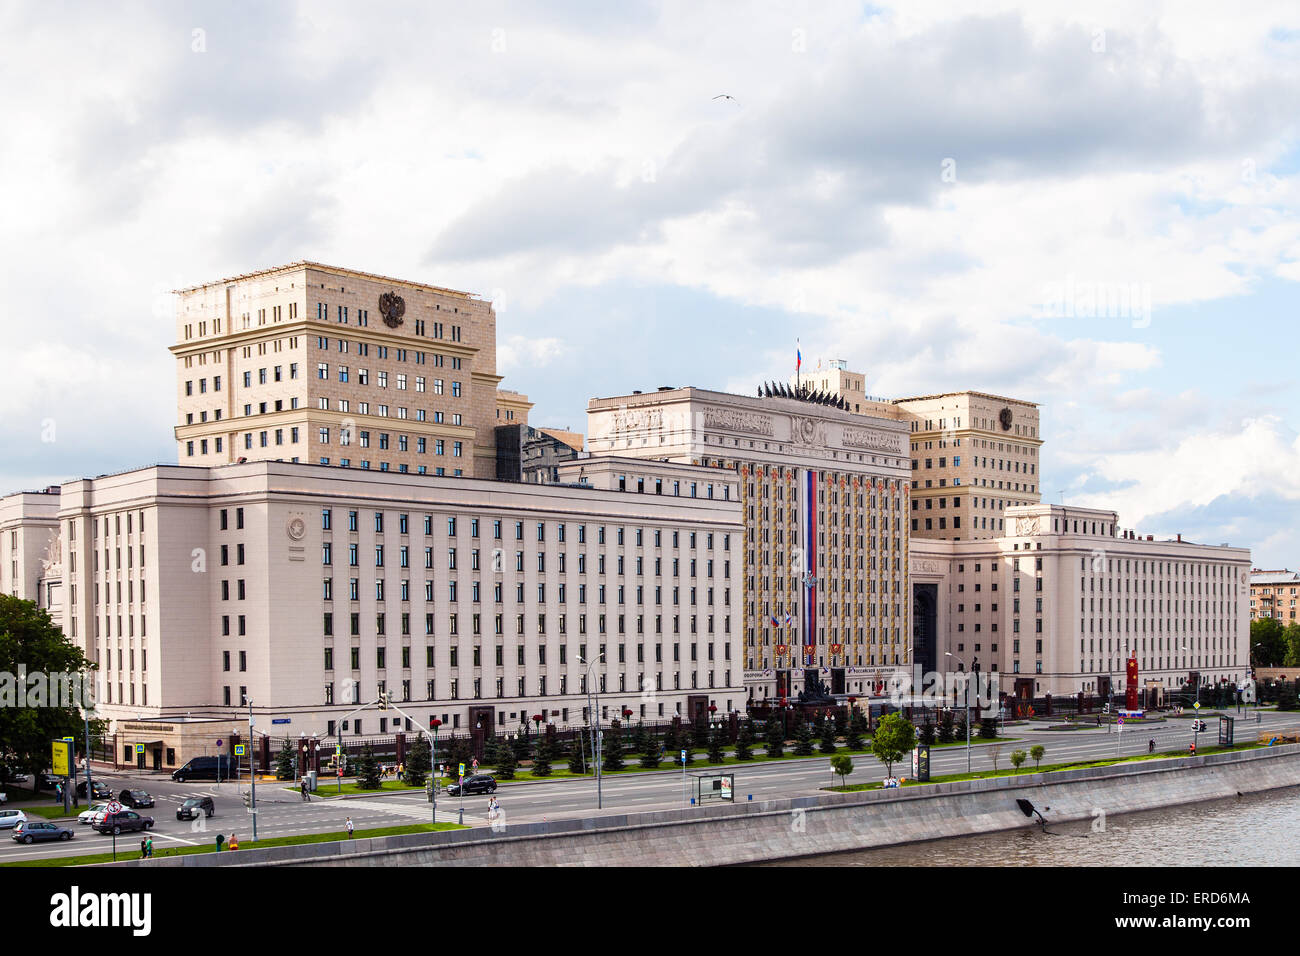 MOSCOW, RUSSIA - MAY 30, 2015: building of the Ministry of Defense of Russia on Frunzenskaya embankment in Moscow, Russia Stock Photo